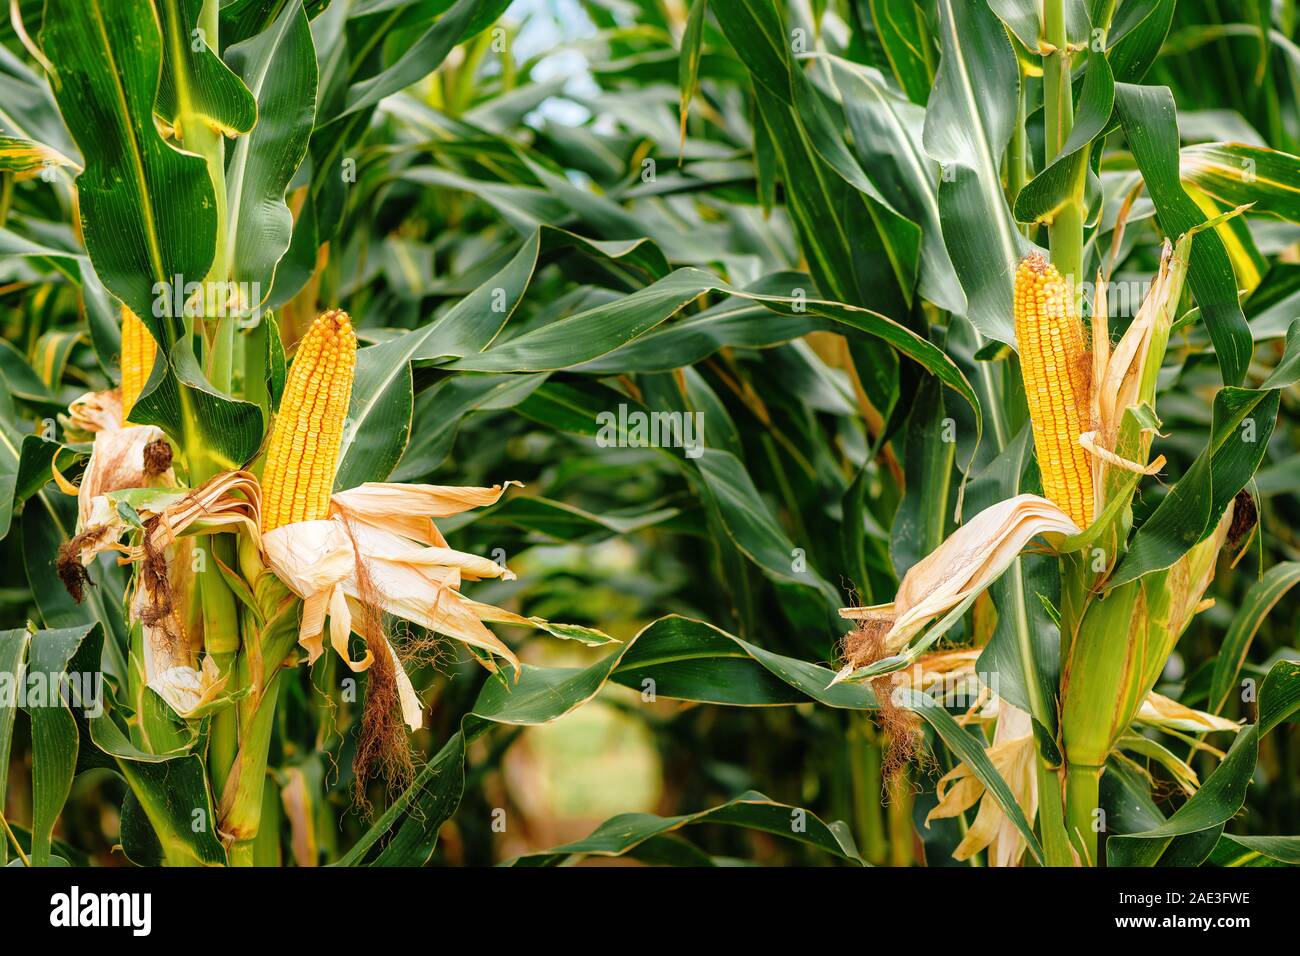 Corn on the cob in plantation field. Ripe maize crops are ready for harvesting. Stock Photo